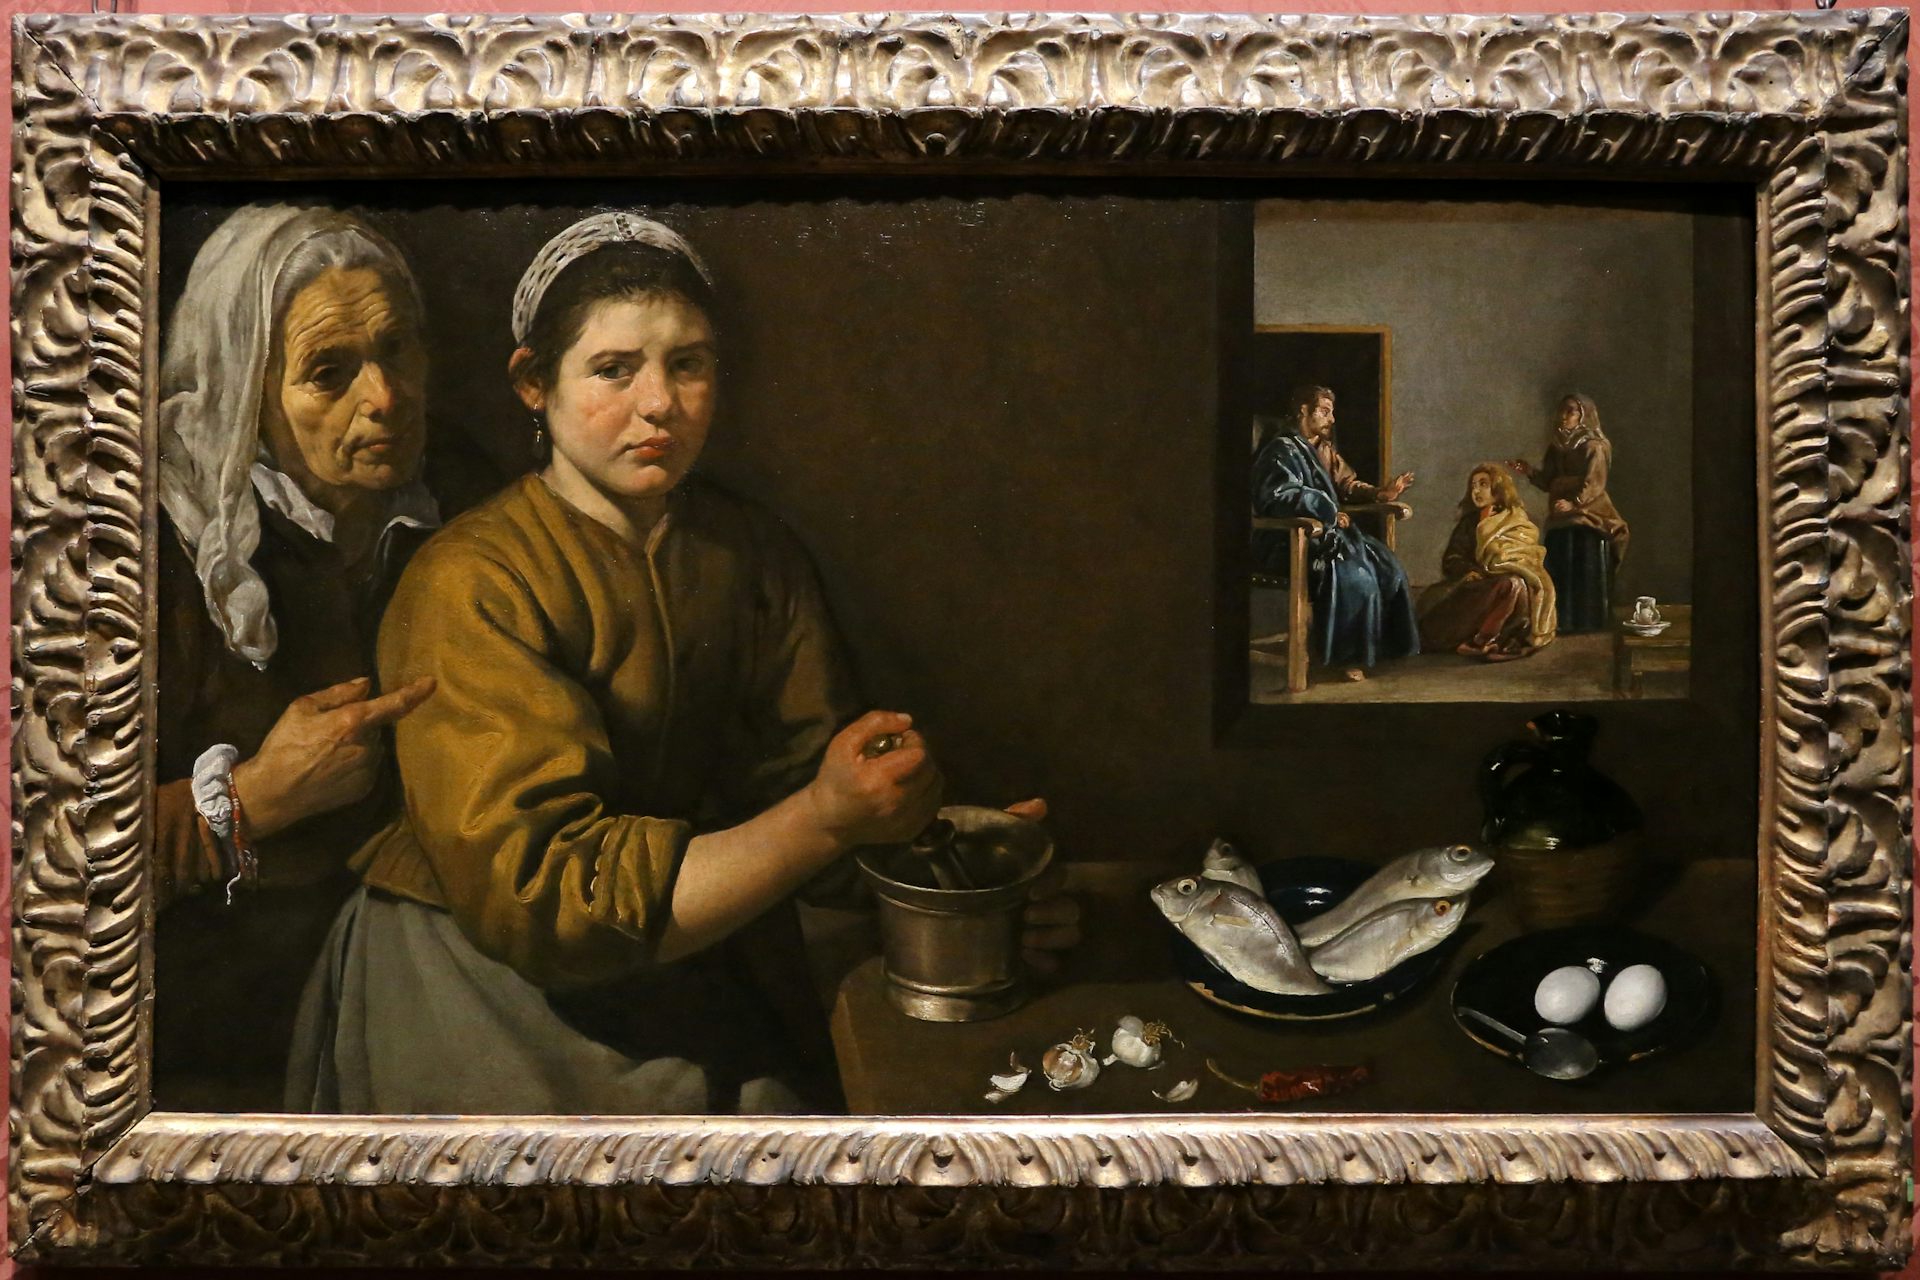 Painting of an older person pointing at a maid grinding garlic; a painting of Christ and Mary hangs above the plates of fish and eggs on the table